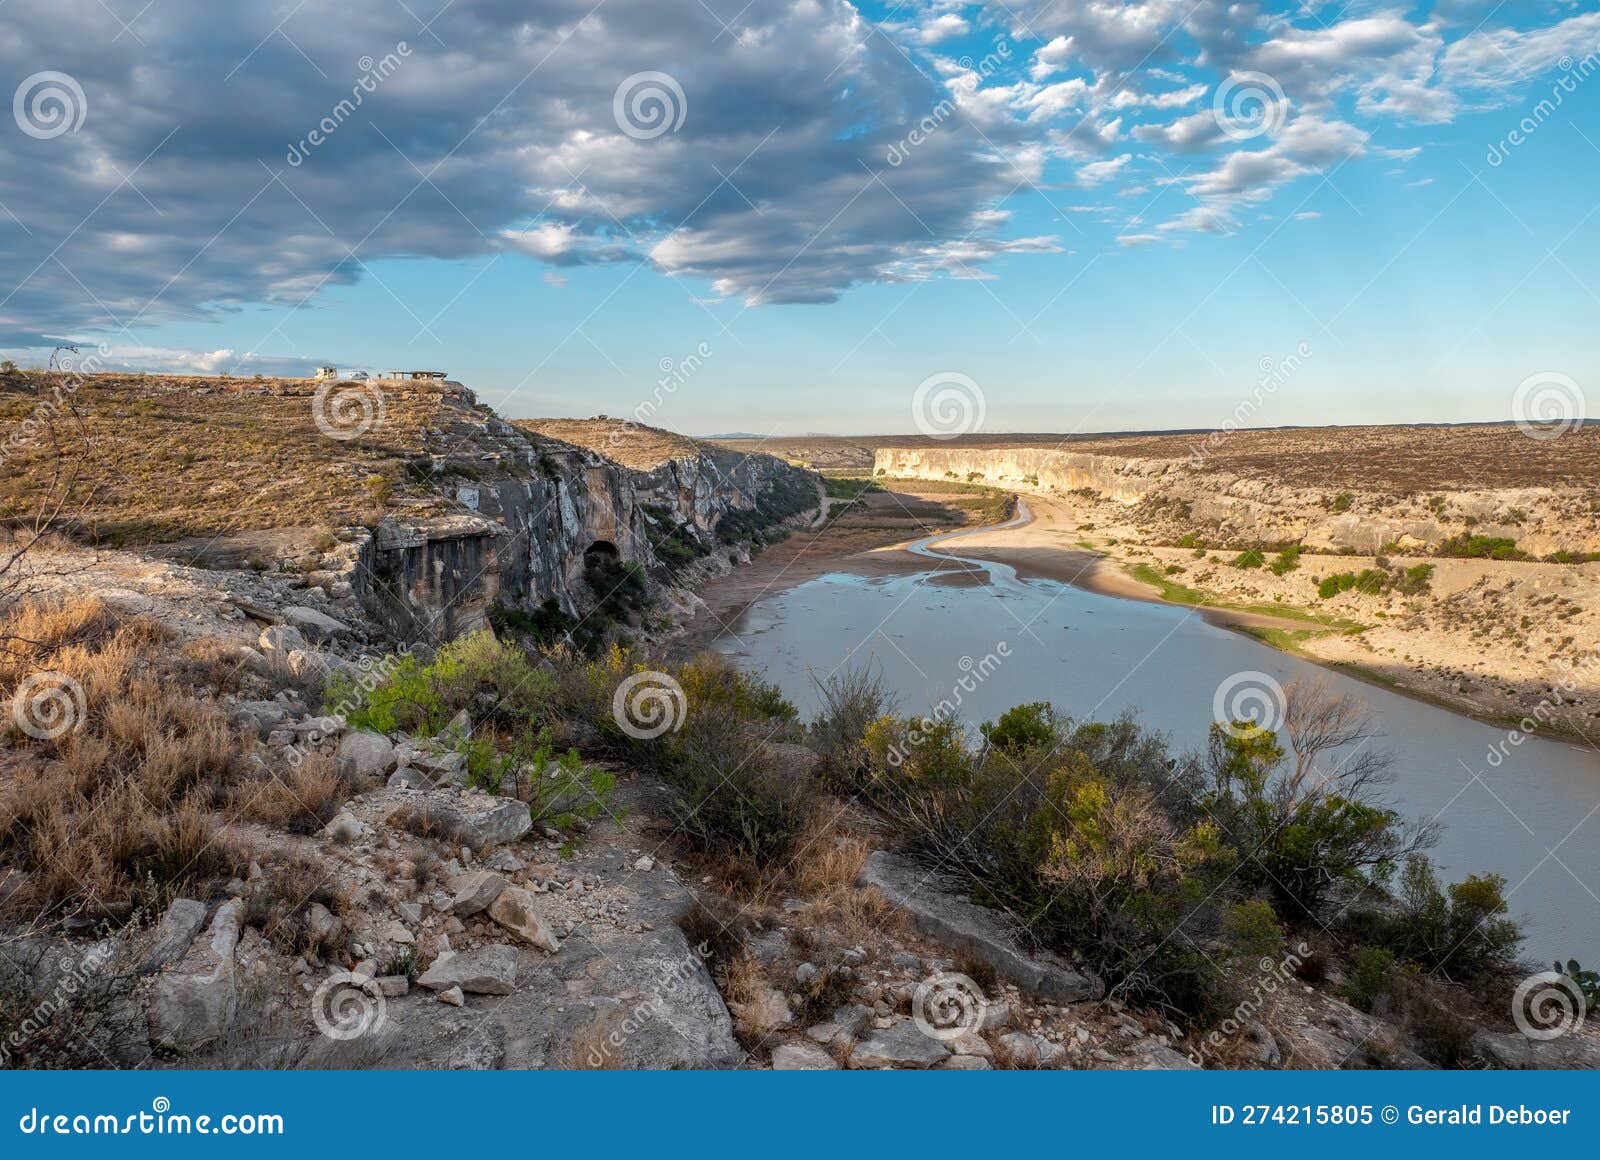 The Pecos River Valley in Texas Stock Image - Image of river, colorful:  274215805